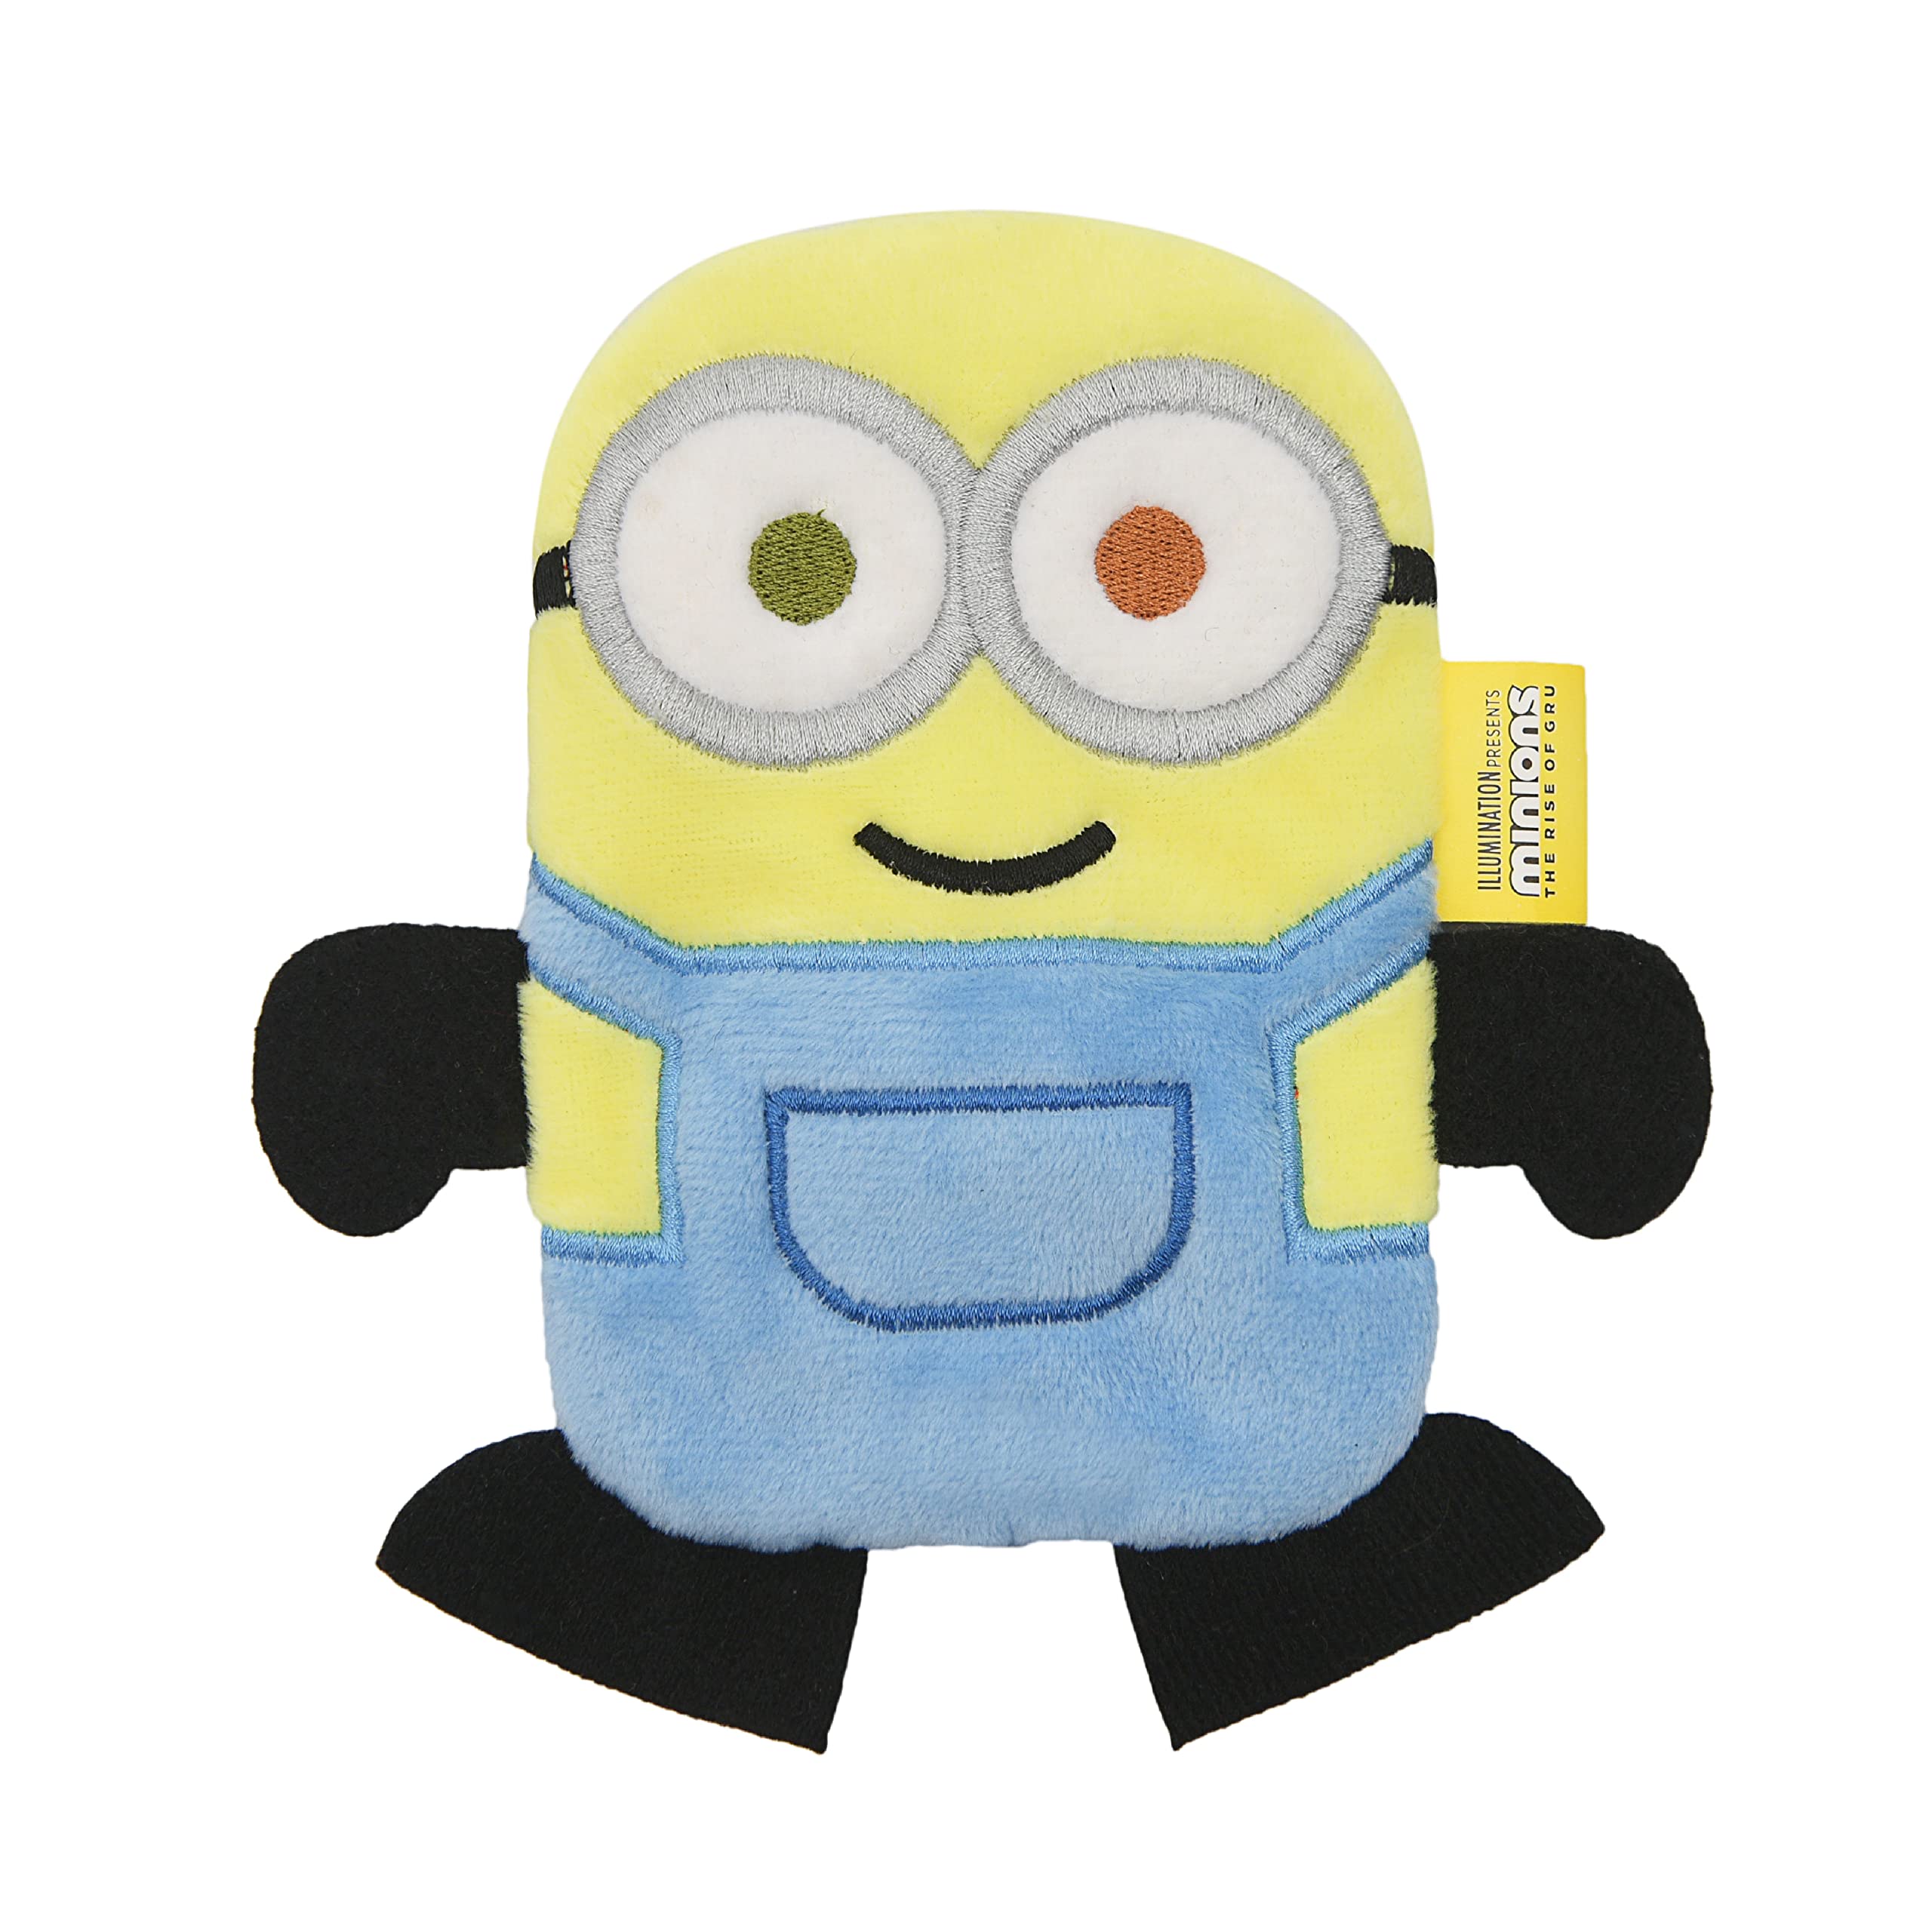 Despicable Me Minions Bob & Kevin Plush Crinkle Dog Toy $2.99